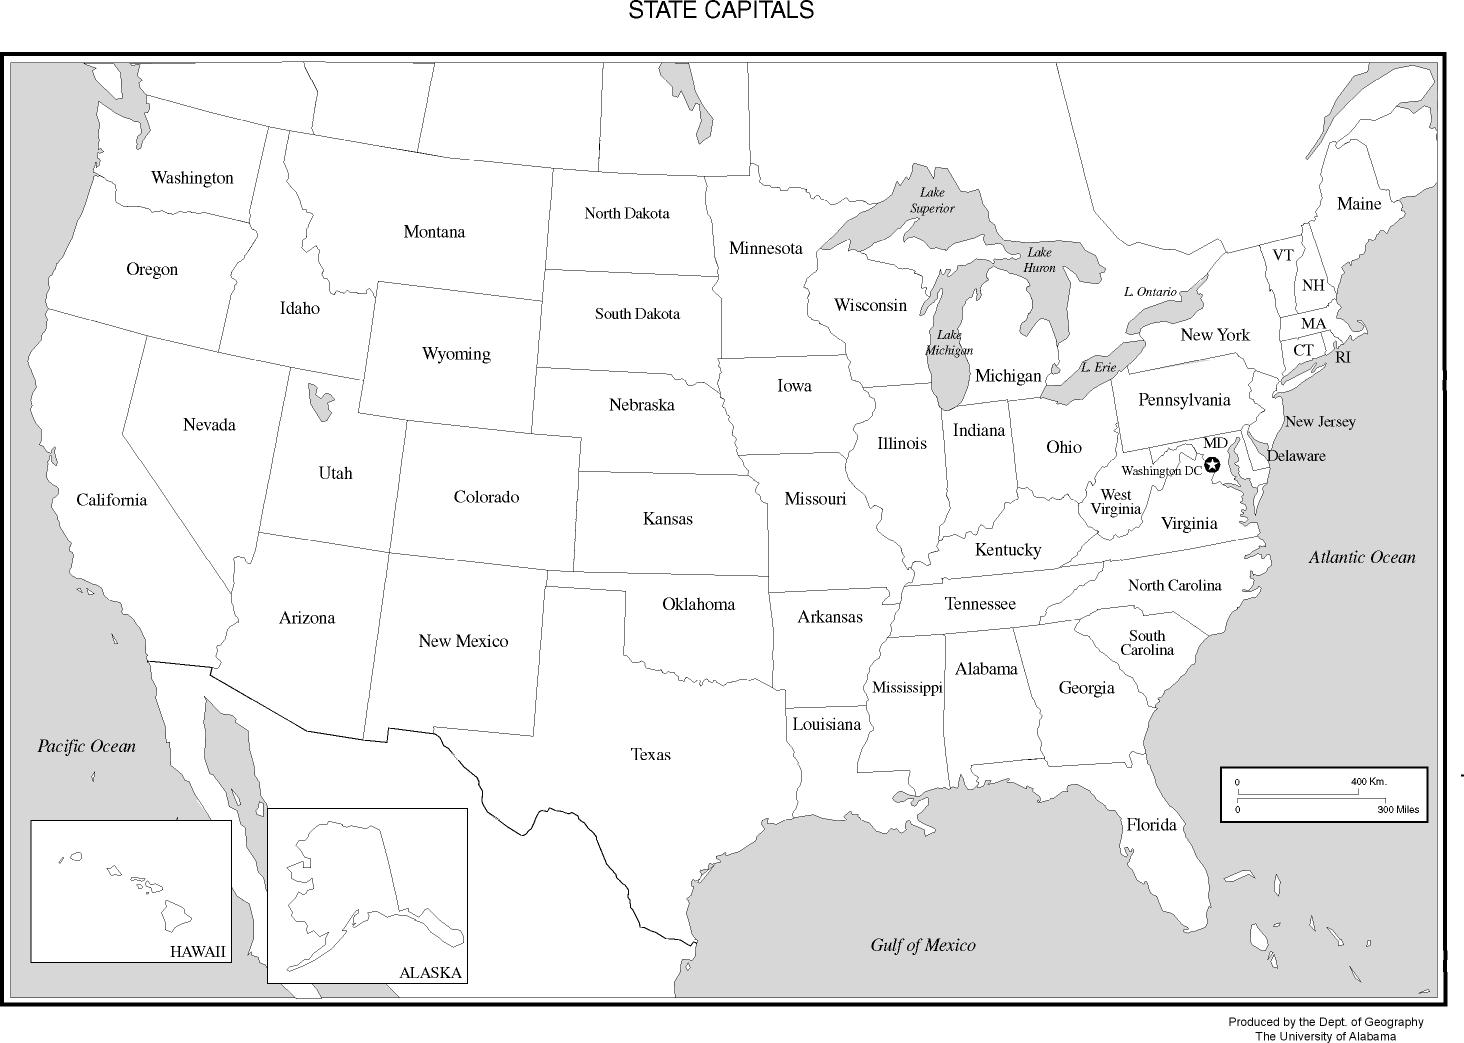 4-best-images-of-black-and-white-printable-maps-united-states-map-black-and-white-blank-world